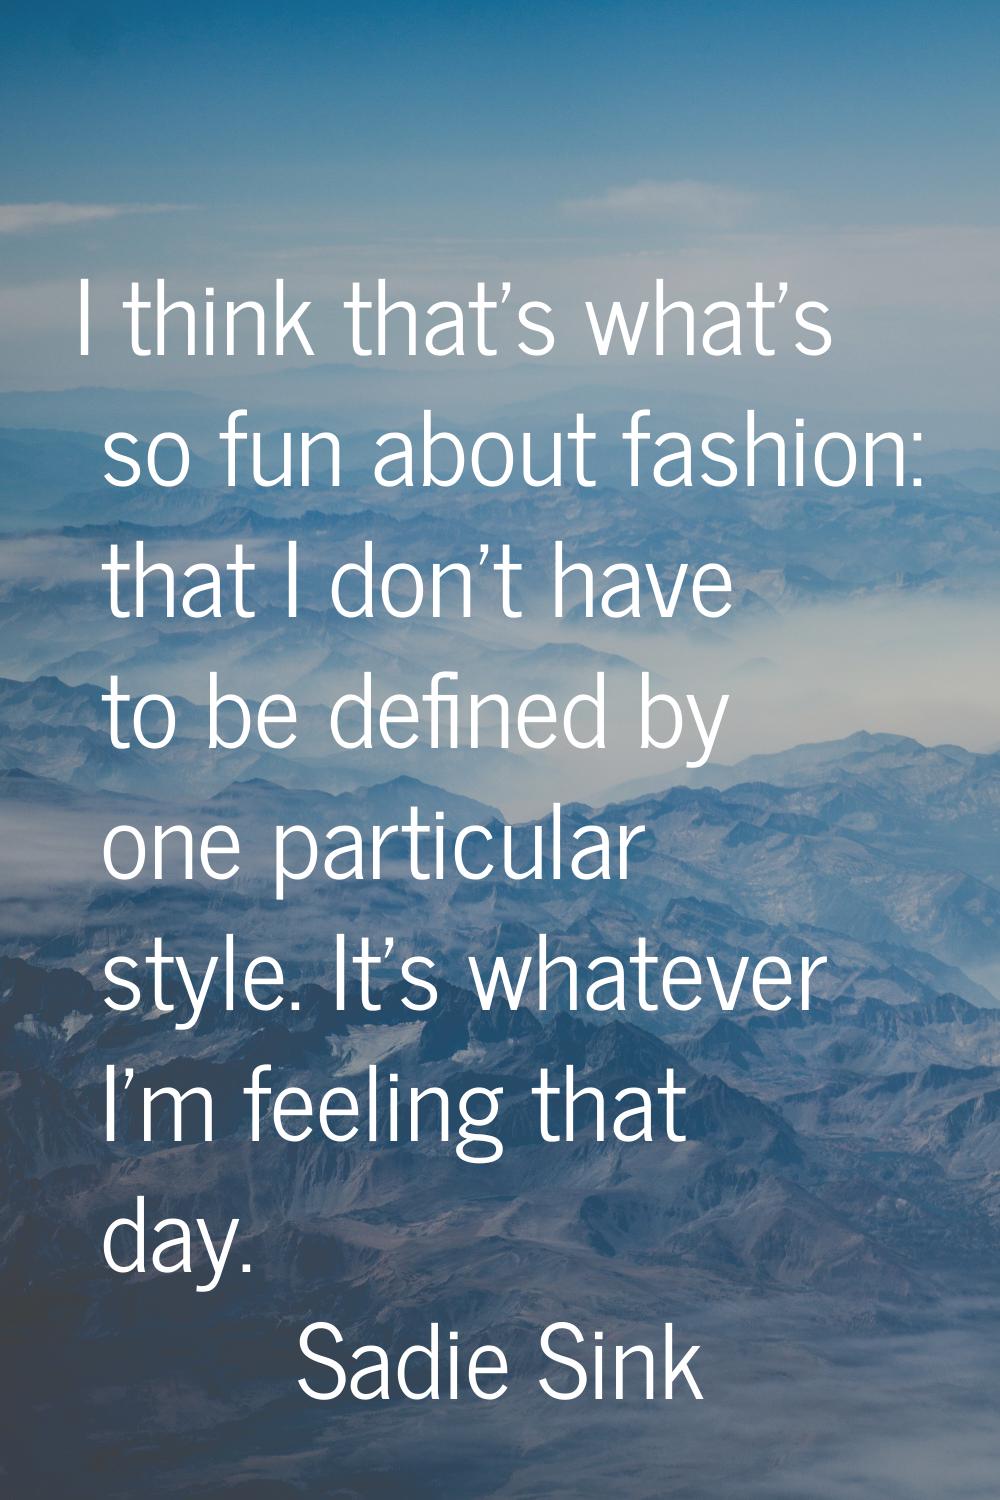 I think that's what's so fun about fashion: that I don't have to be defined by one particular style